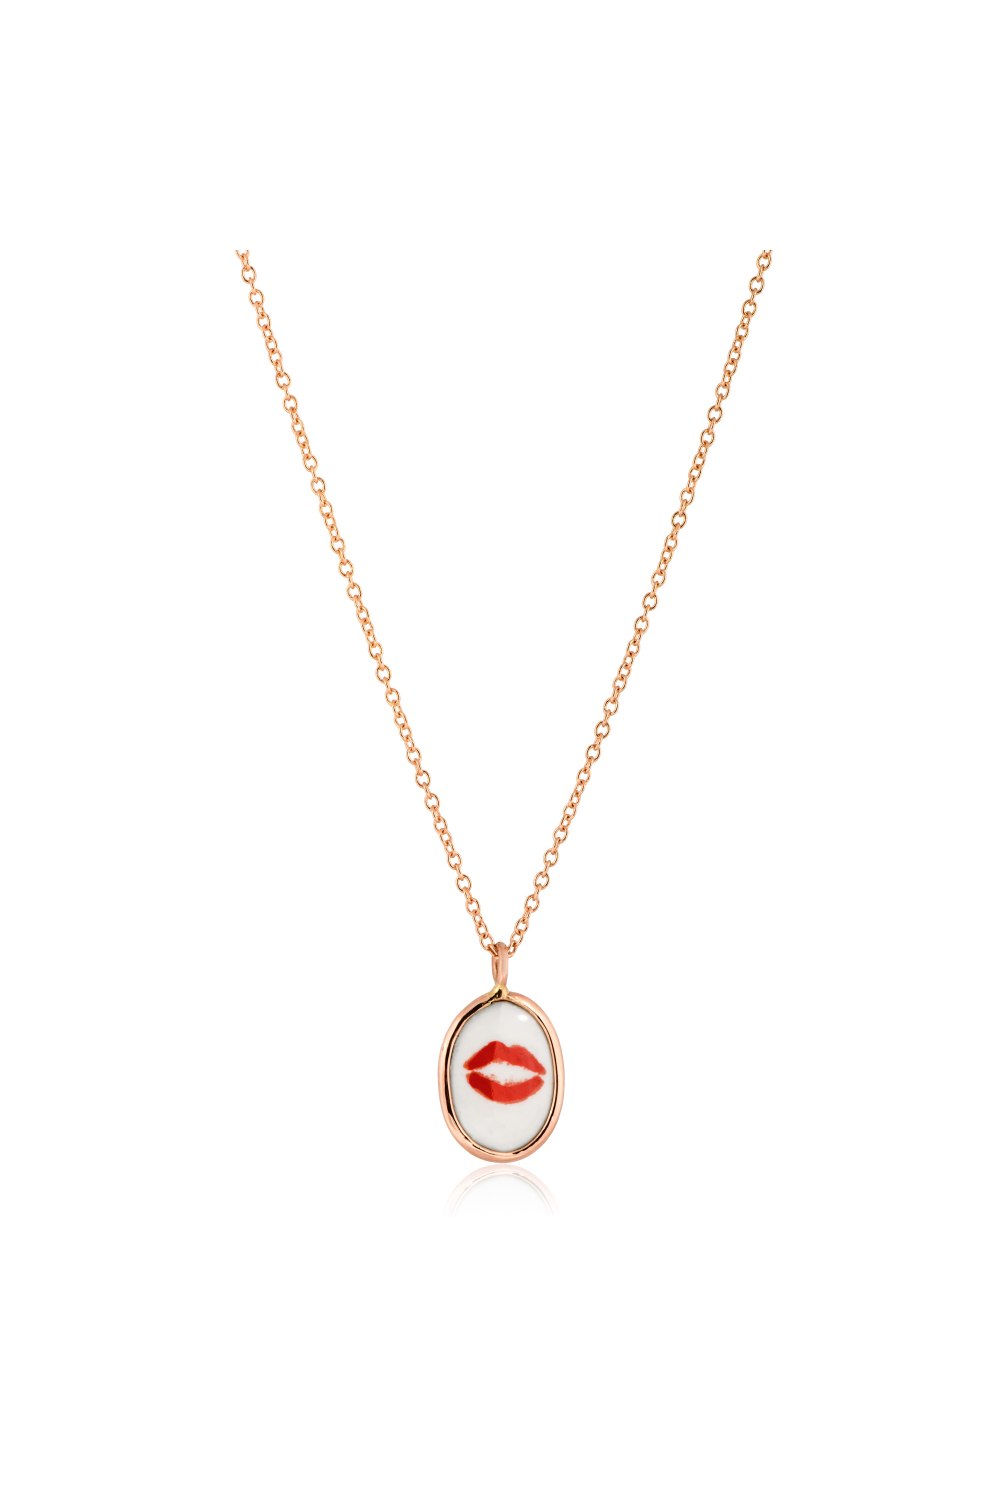 Lips Two Sided Gold Necklace